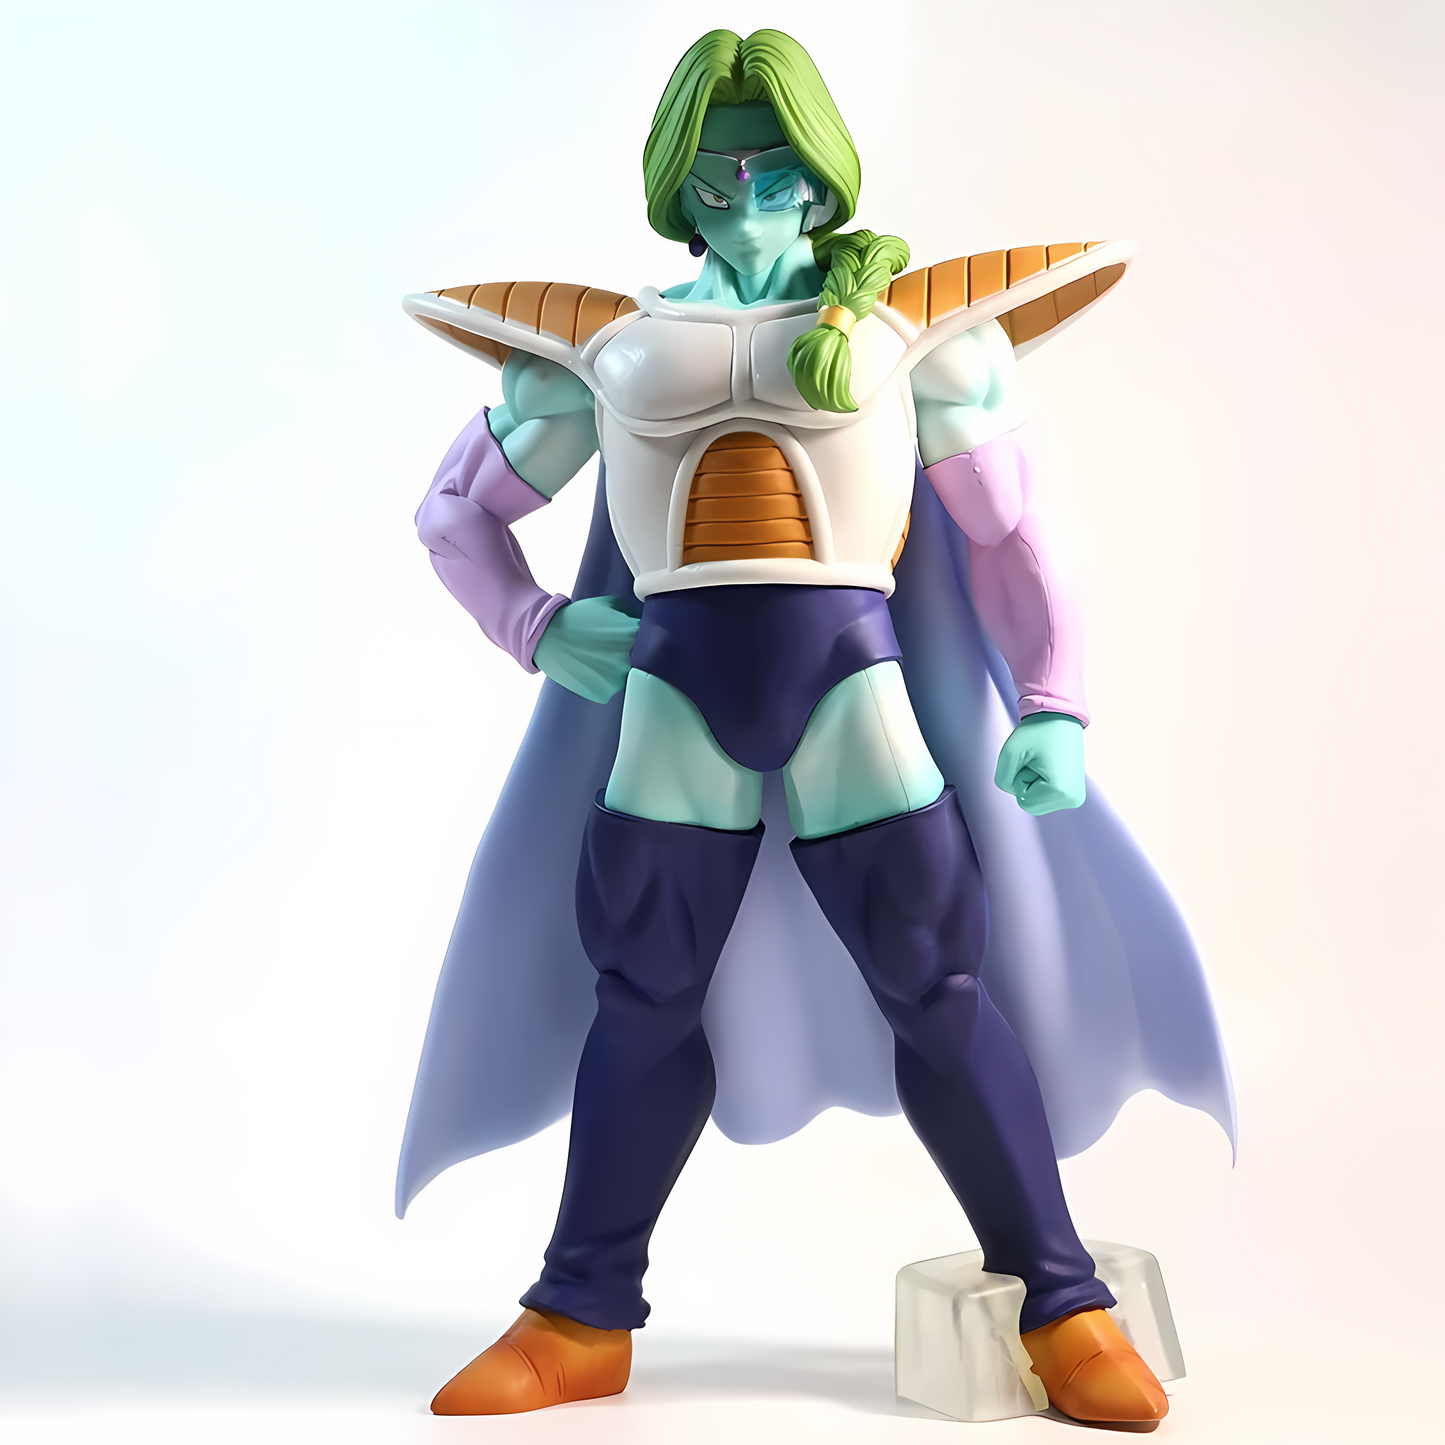 Dragon Ball collectible figure of Zarbon standing confidently with a cape, displaying his muscular build and detailed armor, perfect for fans of Dragon Ball figures.